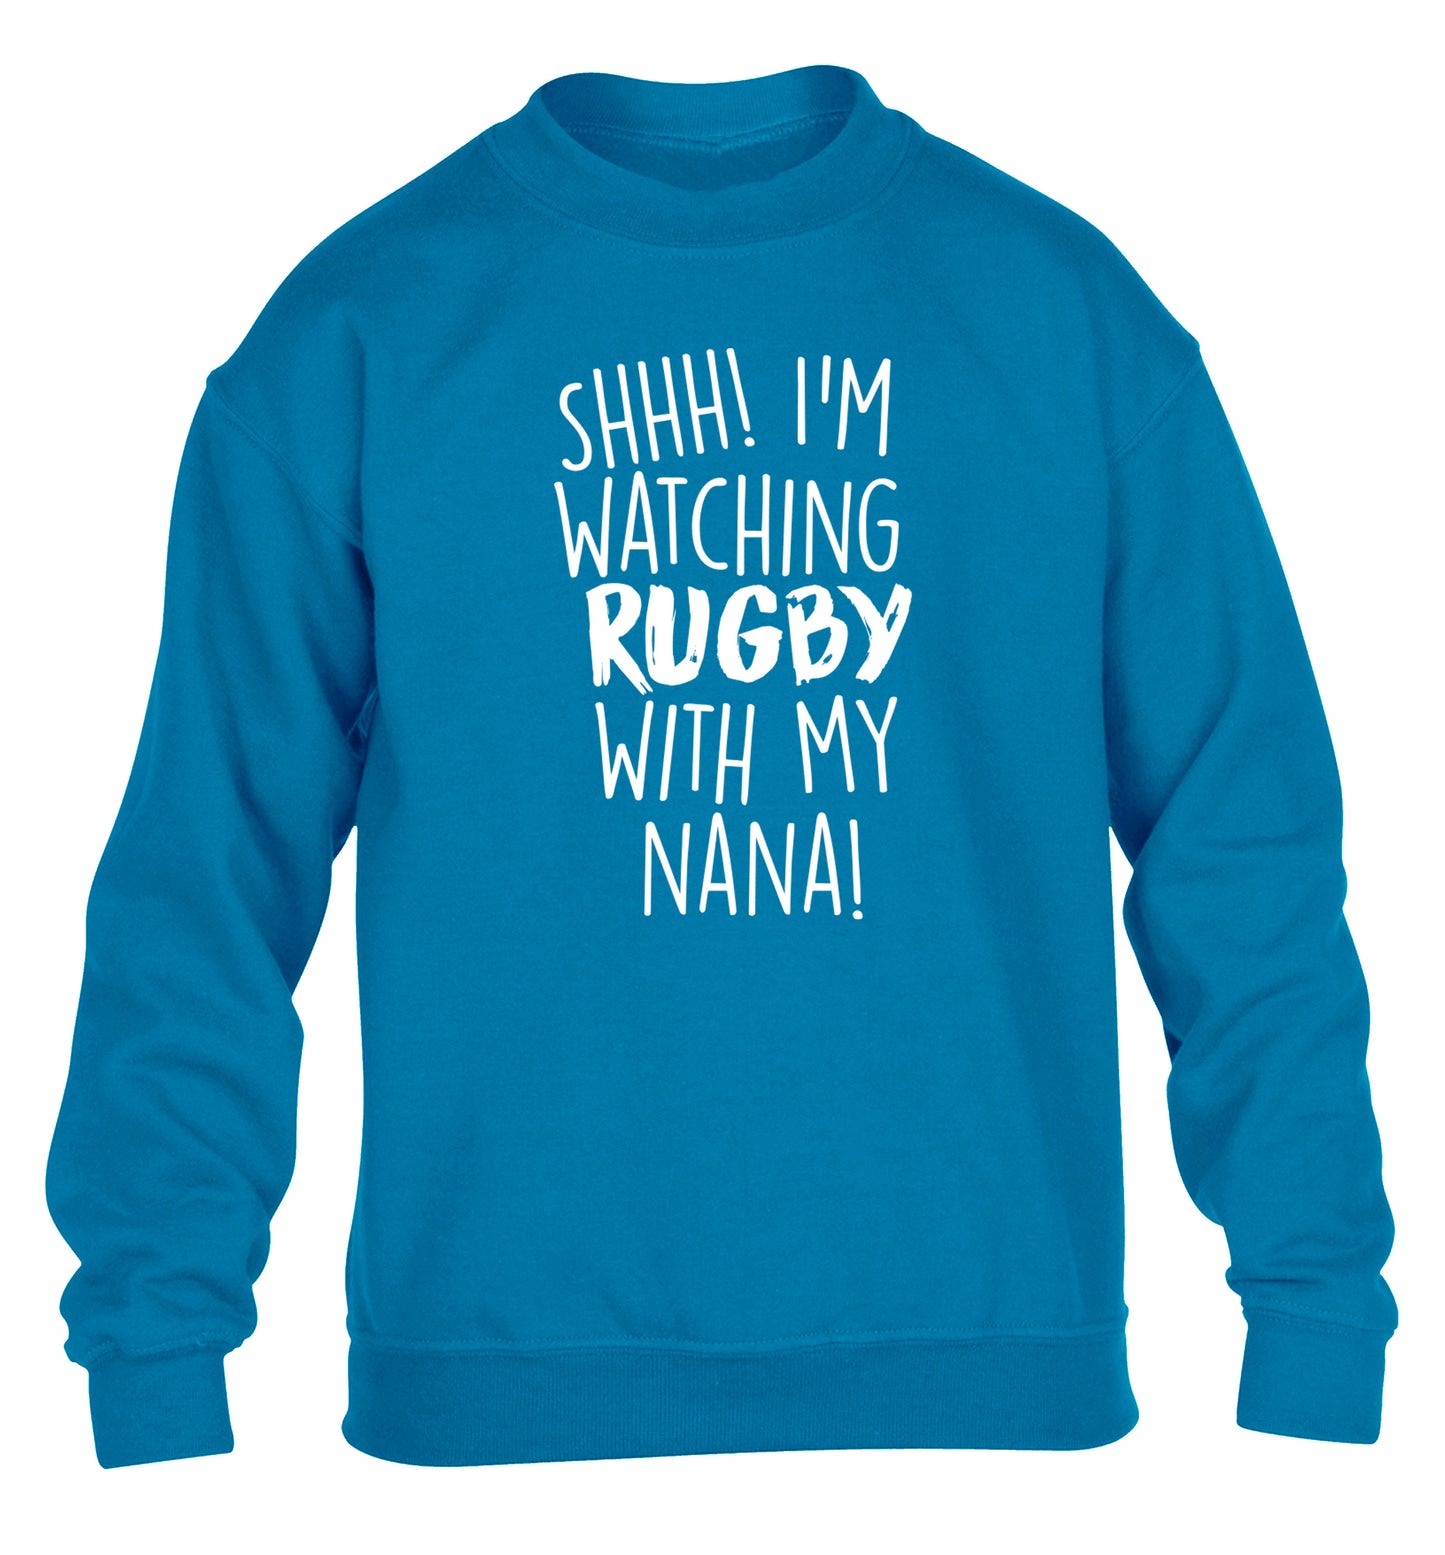 Shh I'm watching rugby with my nana children's blue sweater 12-13 Years